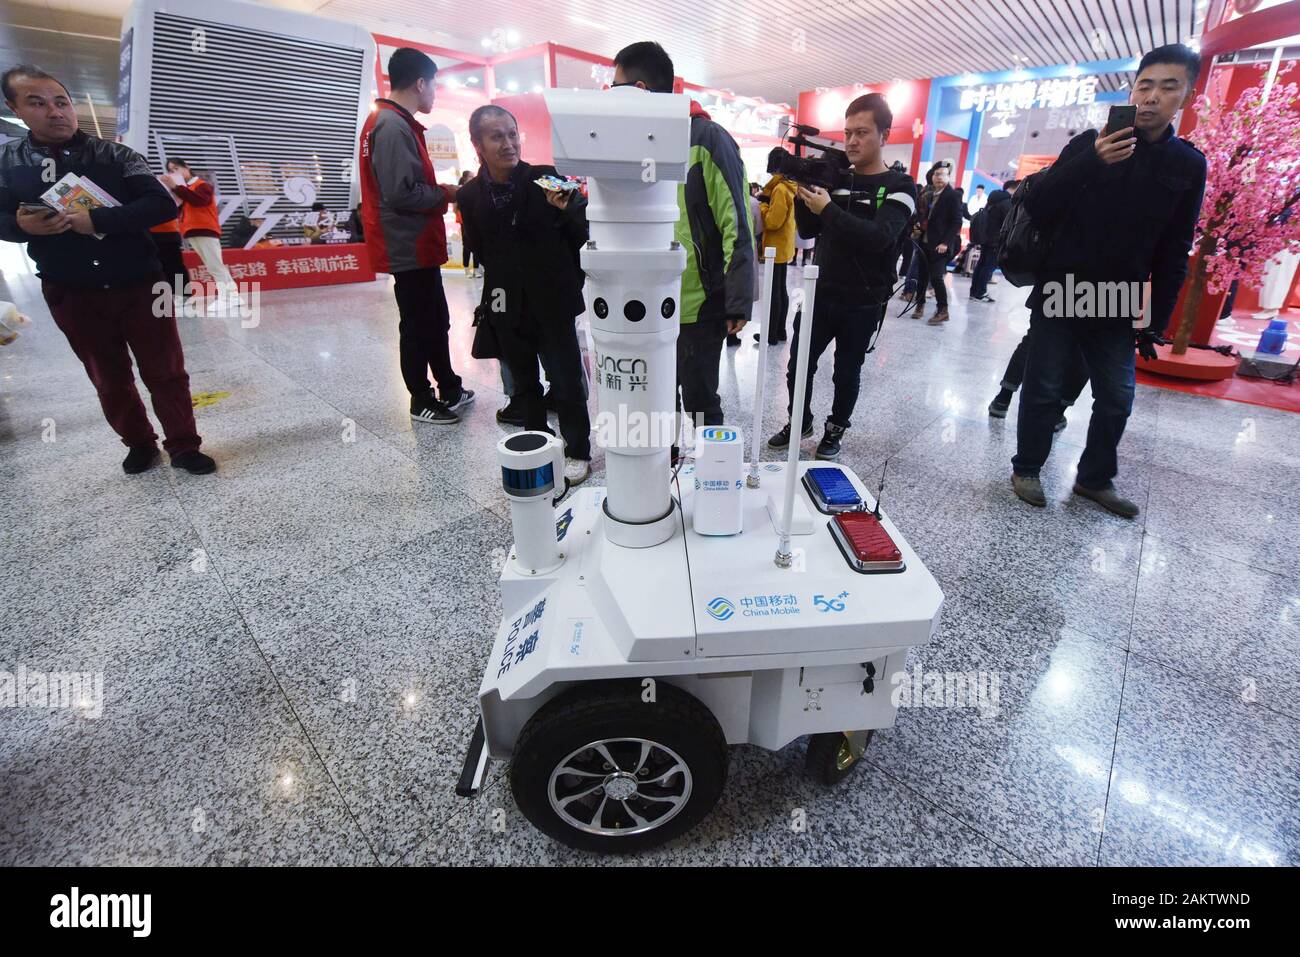 A police robot powered by the 5G wireless service of China Mobile patrols the East Hangzhou Railway Station during the annual Spring Festival travel r Stock Photo